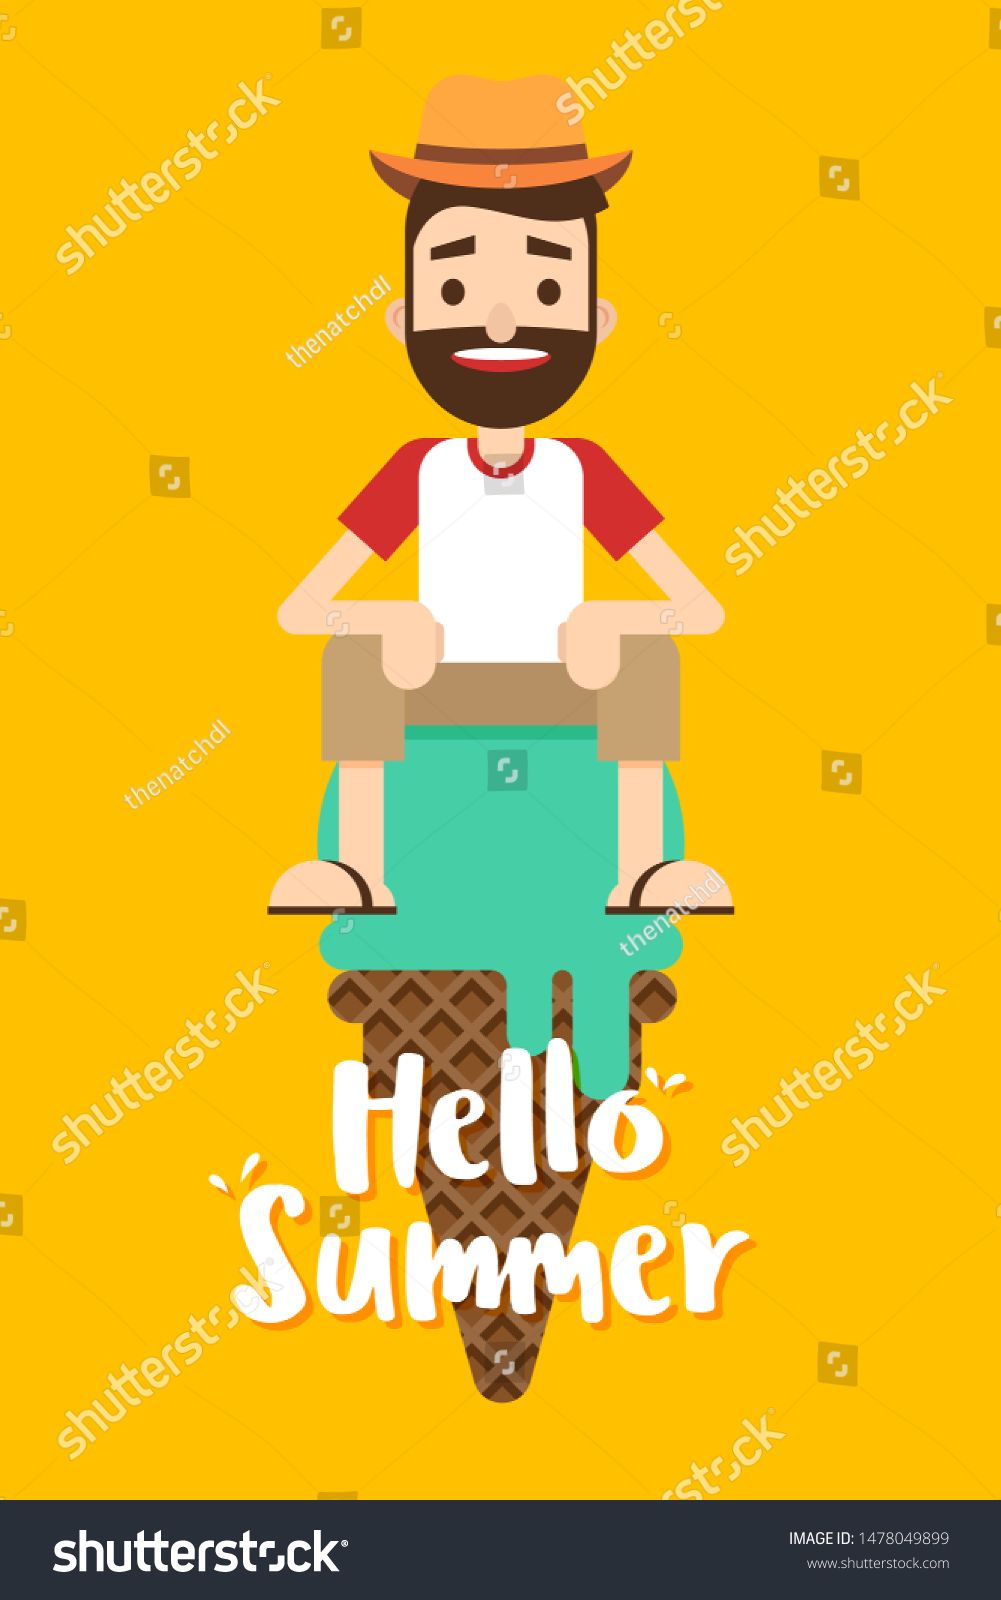 Summer Time Happy Holiday Poster Template Stock Vector Royalty Free